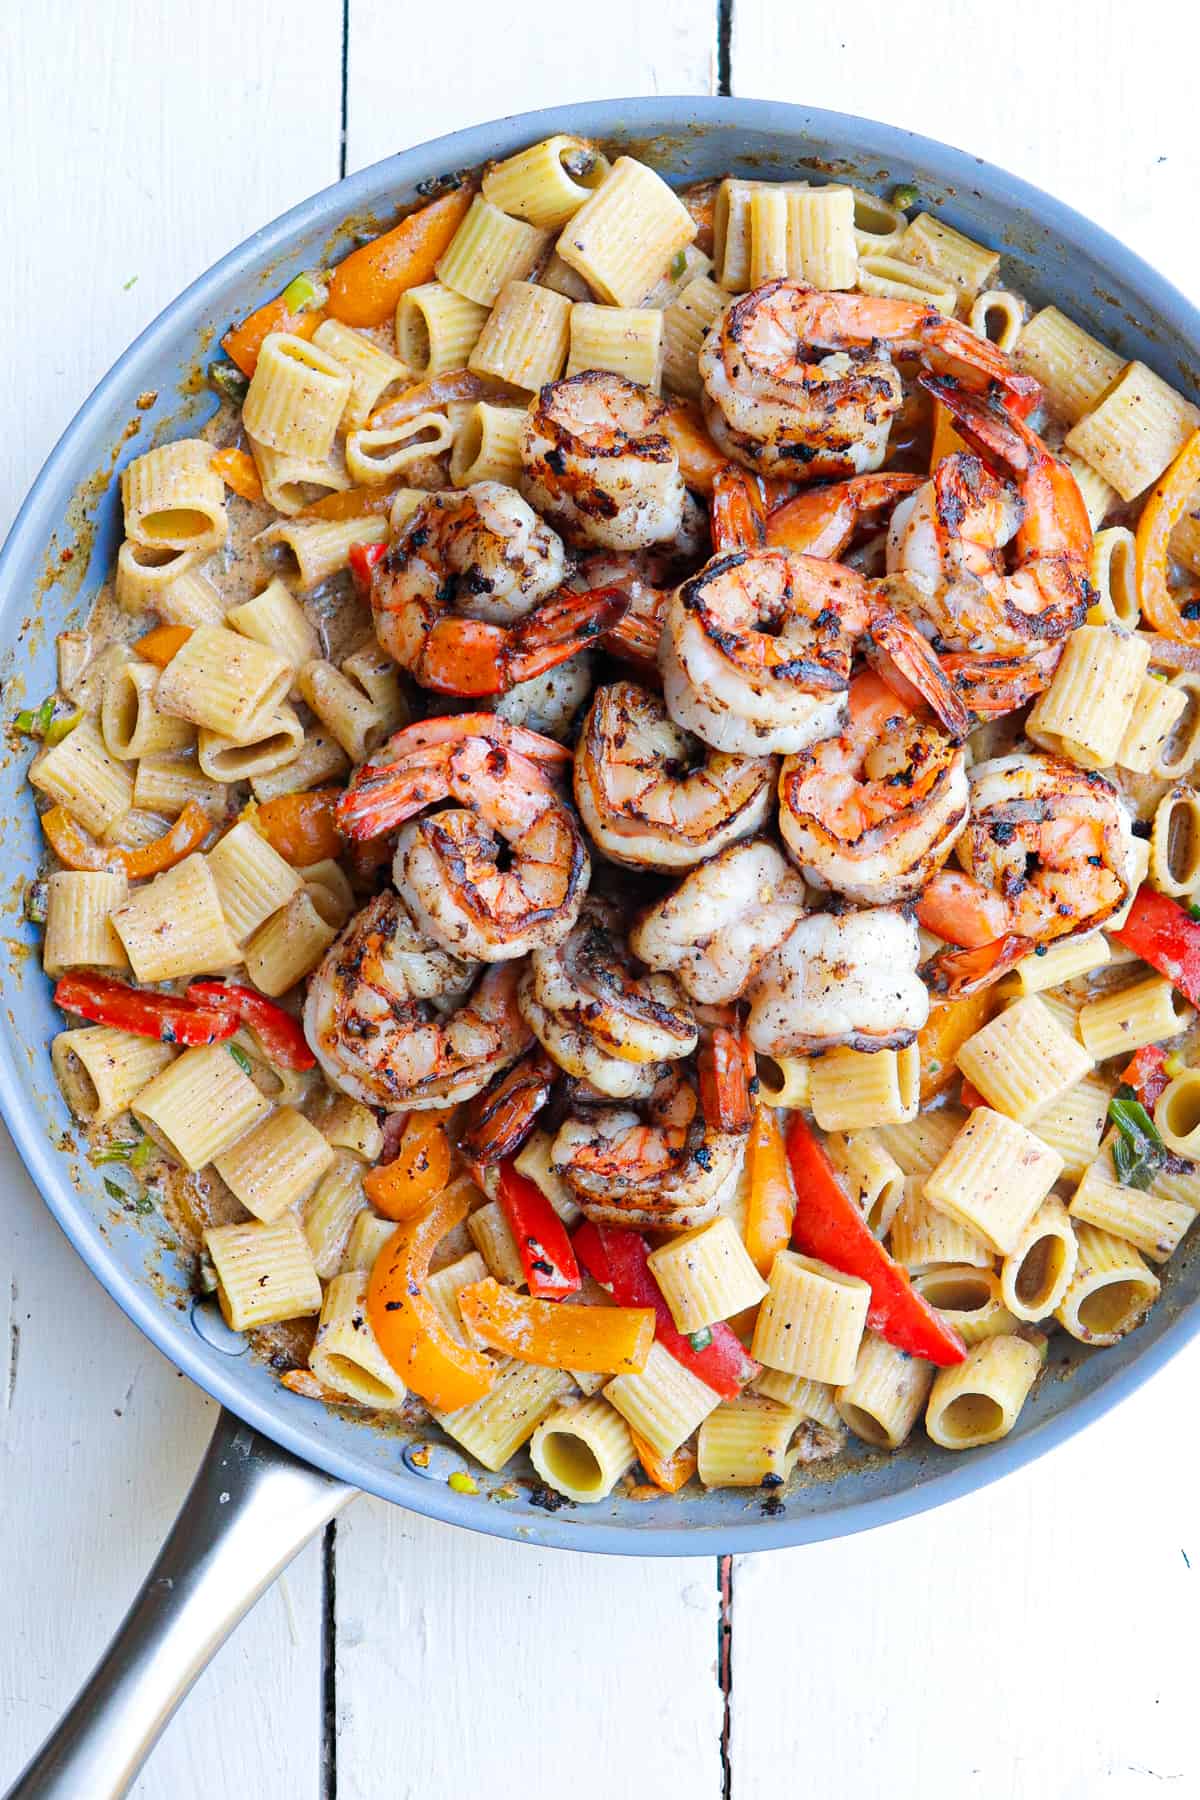 cooked shrimp added to the top of the pasta.